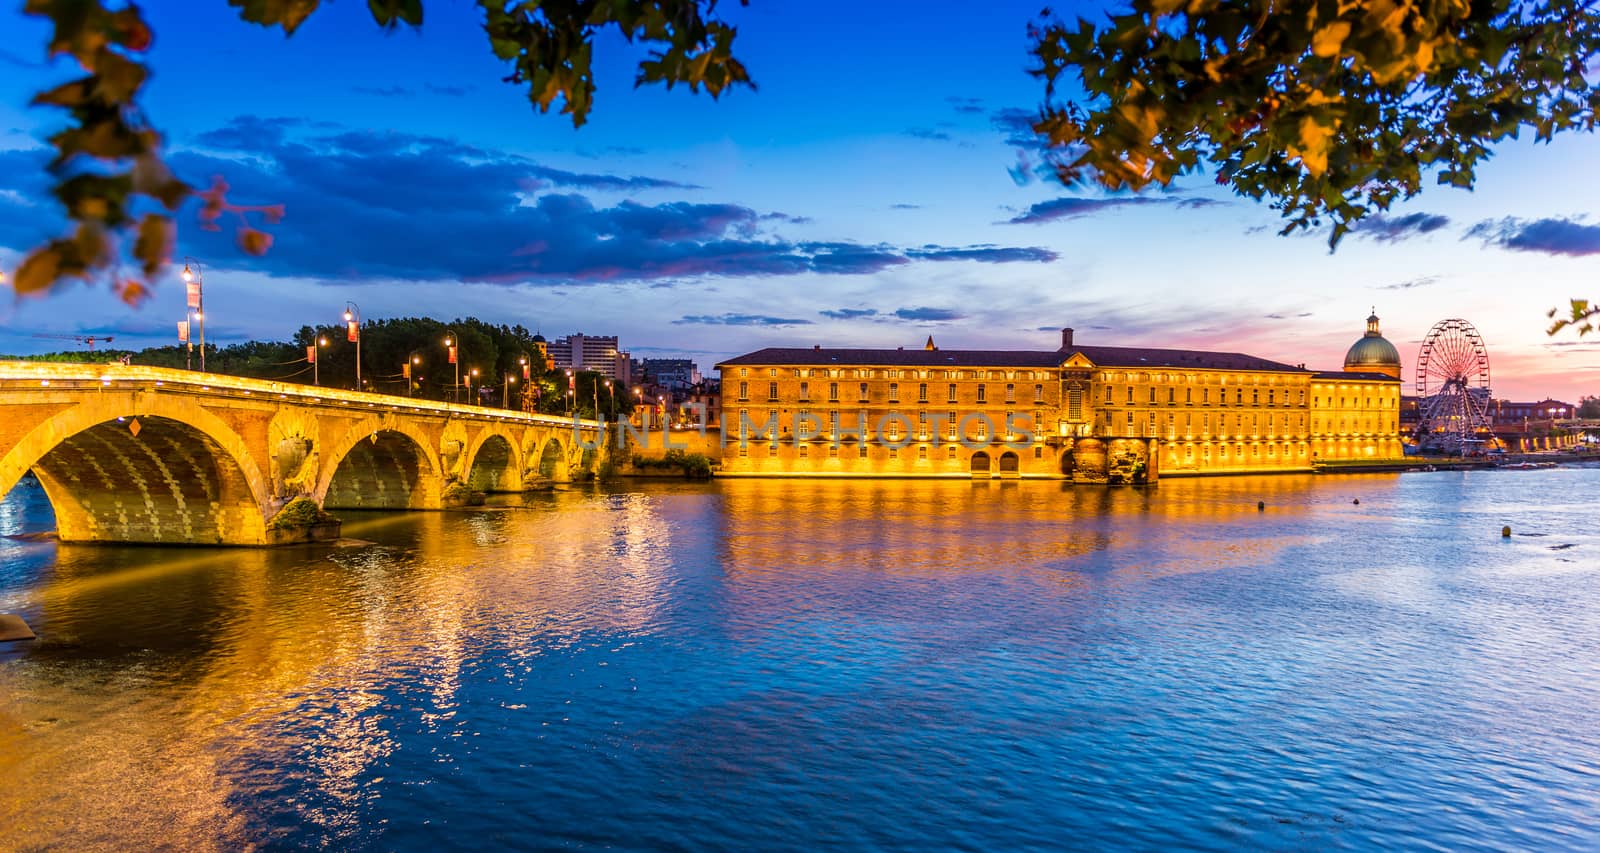 Superb, panorama of the banks of the Garonne, one summer evening, with the Pont Neuf and the Hotel Dieu illuminated, giving them a golden impression.